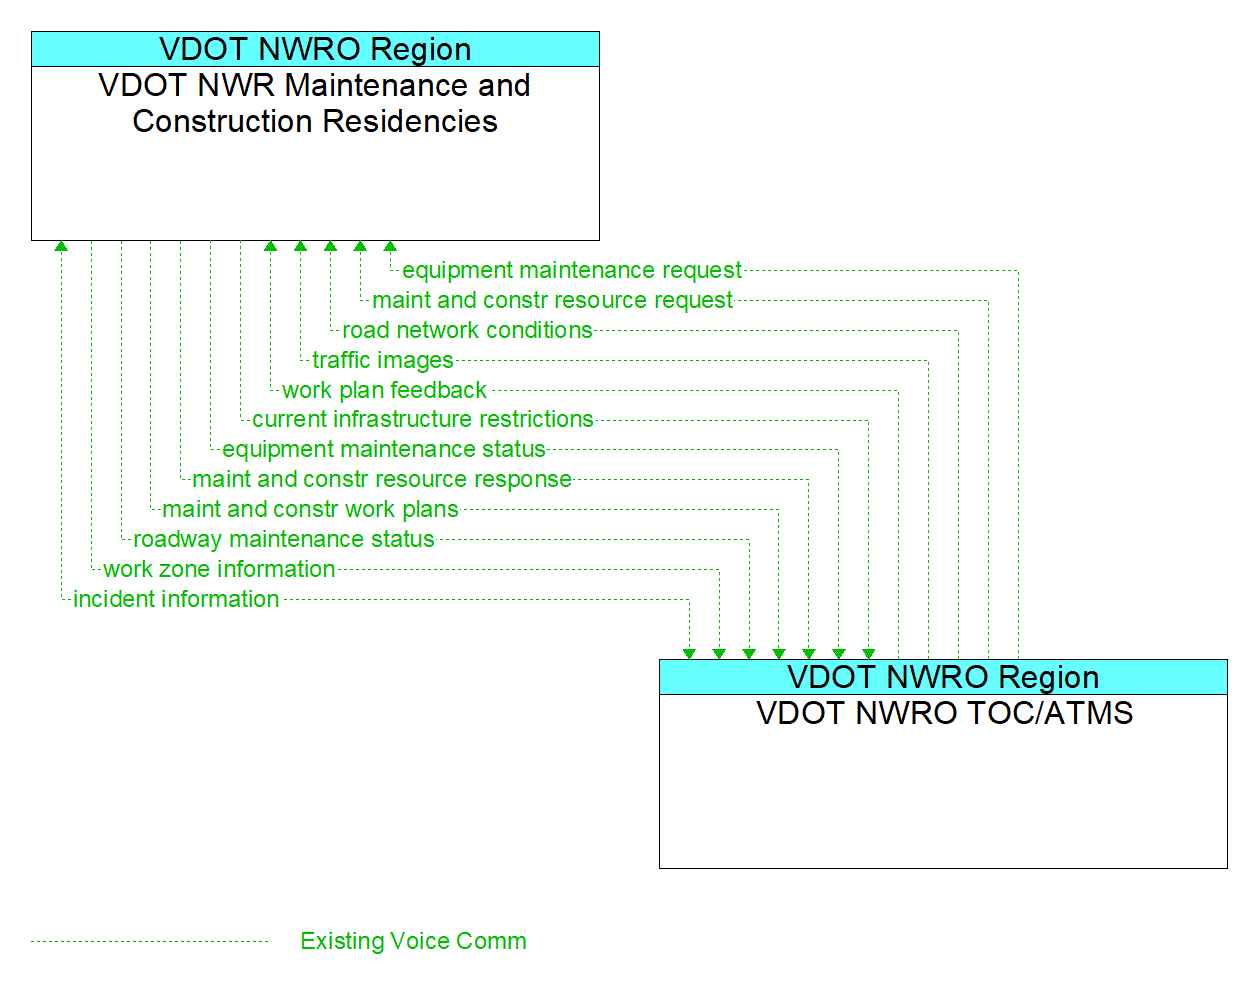 Architecture Flow Diagram: VDOT NWRO TOC/ATMS <--> VDOT NWR Maintenance and Construction Residencies